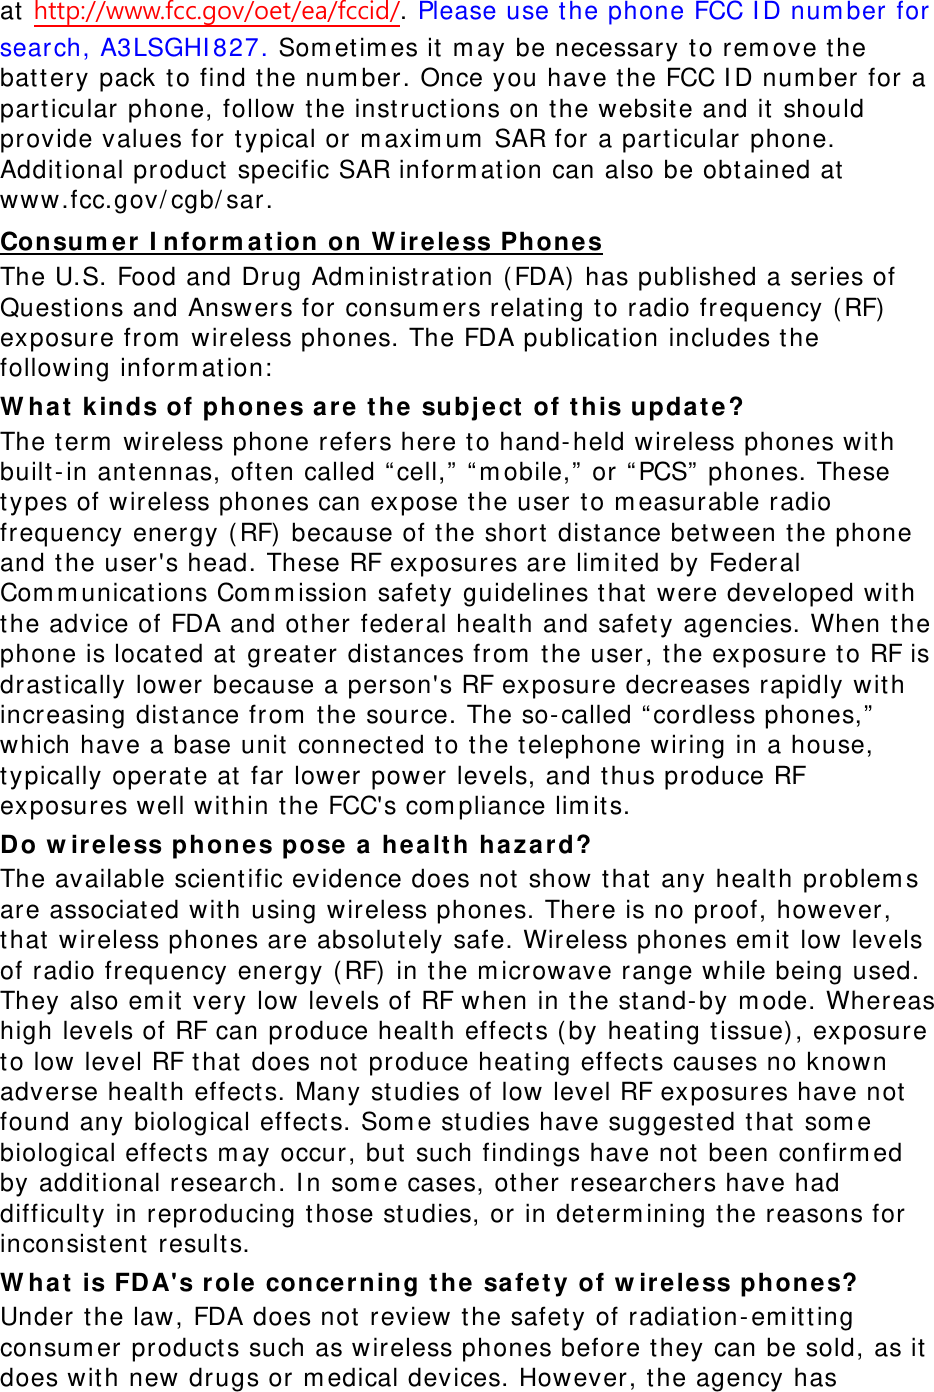 at  http://www.fcc.gov/oet/ea/fccid/. Please use t he phone FCC I D num ber for search, A3LSGHI 827. Som etim es it m ay be necessary t o rem ove the battery pack t o find t he num ber. Once you have t he FCC I D num ber for a part icular phone, follow the inst ruct ions on the websit e and it  should provide values for t ypical or m axim um  SAR for a part icular phone. Addit ional product  specific SAR inform at ion can also be obt ained at  www.fcc.gov/ cgb/ sar. The U.S. Food and Dr ug Adm inist rat ion ( FDA)  has published a ser ies of Quest ions and Answ ers for consum ers relat ing t o radio frequency ( RF)  exposure from  wireless phones. The FDA publicat ion includes the following inform at ion:  Consum er  I nform ation on W ir eless Phone s W ha t  k inds of phones a re t he  subj e ct  of t his upda t e? The t erm  wireless phone refers here to hand-held wireless phones with built -in ant ennas, often called “ cell,”  “ m obile,”  or  “ PCS”  phones. These types of wireless phones can expose t he user to m easurable radio frequency energy ( RF)  because of t he short distance bet ween t he phone and t he user&apos;s head. These RF exposures are lim ited by Federal Com m unications Com m ission safet y guidelines t hat were developed with the advice of FDA and ot her federal healt h and safet y agencies. When t he phone is locat ed at  great er distances from  the user, the exposure t o RF is drast ically lower because a person&apos;s RF exposure decreases rapidly with increasing dist ance from  the source. The so-called “ cordless phones,”  which have a base unit  connect ed t o the telephone wiring in a house, typically operat e at far  lower  pow er levels, and thus produce RF exposur es well wit hin t he FCC&apos;s com pliance lim its. Do w ireless phones pose a hea lt h hazar d? The available scient ific evidence does not  show t hat any healt h problem s are associat ed wit h using wireless phones. There is no pr oof, however , that  wireless phones are absolutely safe. Wireless phones em it  low levels of radio fr equency energy ( RF)  in t he m icrow ave range while being used. They also em it  very low levels of RF w hen in t he st and-by m ode. Whereas high levels of RF can produce healt h effects (by heat ing t issue) , exposure to low level RF t hat  does not  produce heat ing effect s causes no known adverse health effect s. Many studies of low level RF exposures have not found any biological effects. Som e st udies have suggest ed t hat  som e biological effects m ay occur, but  such findings have not been confirm ed by addit ional research. I n som e cases, ot her researchers have had difficult y in reproducing t hose studies, or in det erm ining t he reasons for inconsist ent  result s. W ha t  is FDA&apos;s role  concerning t he sa fe t y of w ir eless phones? Under t he law, FDA does not  review the safet y of radiat ion-em it ting consum er product s such as wireless phones before they can be sold, as it does wit h new drugs or m edical devices. However, the agency has 